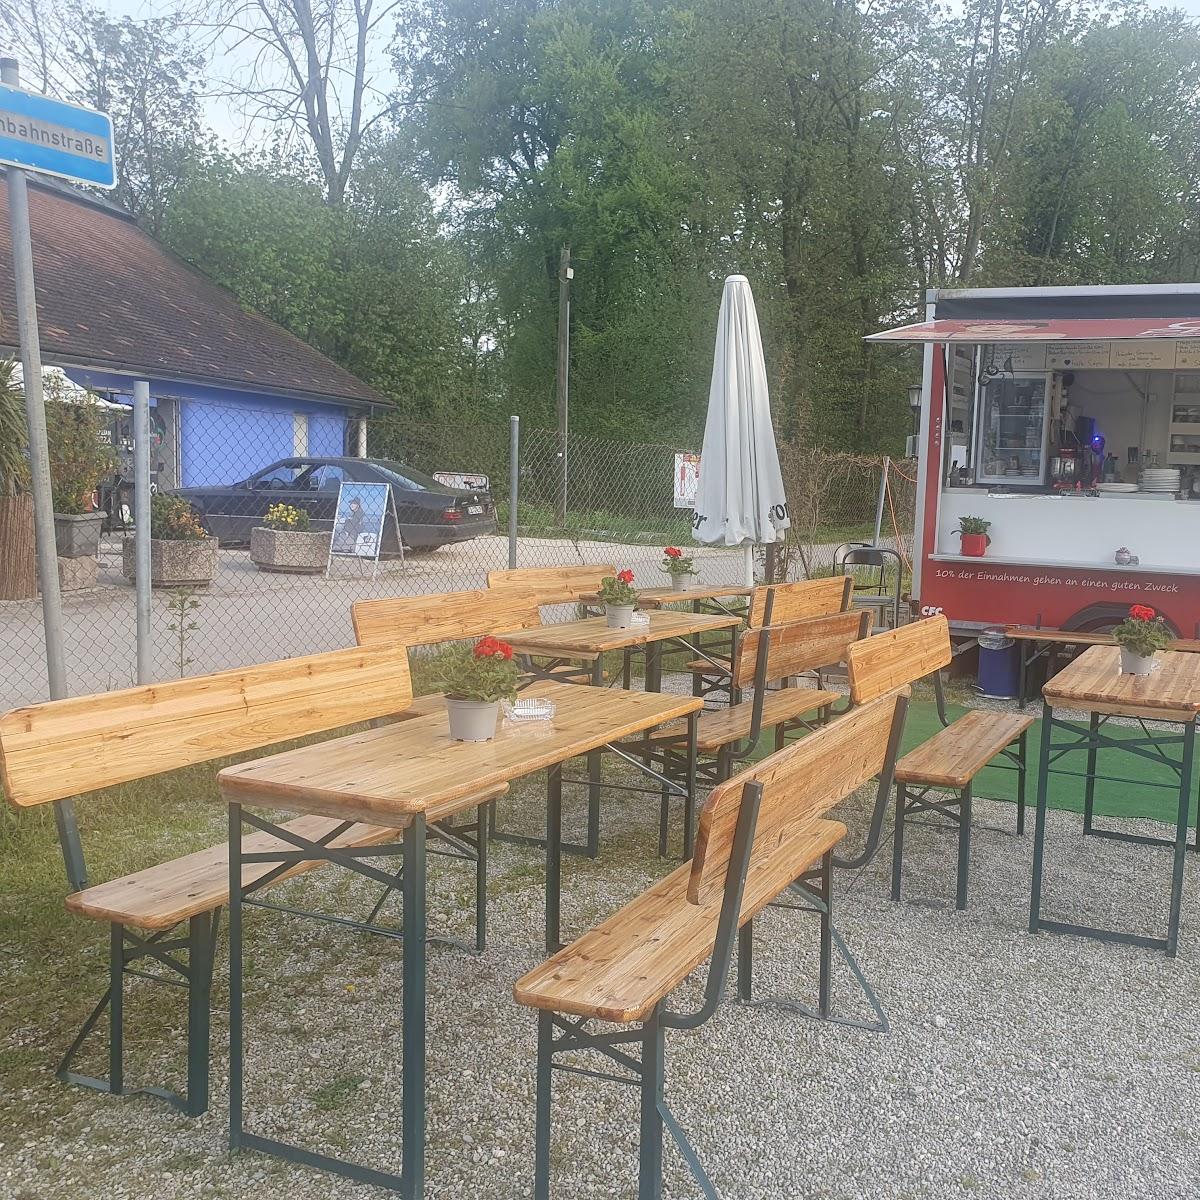 Restaurant "On Phoebe" in Utting am Ammersee